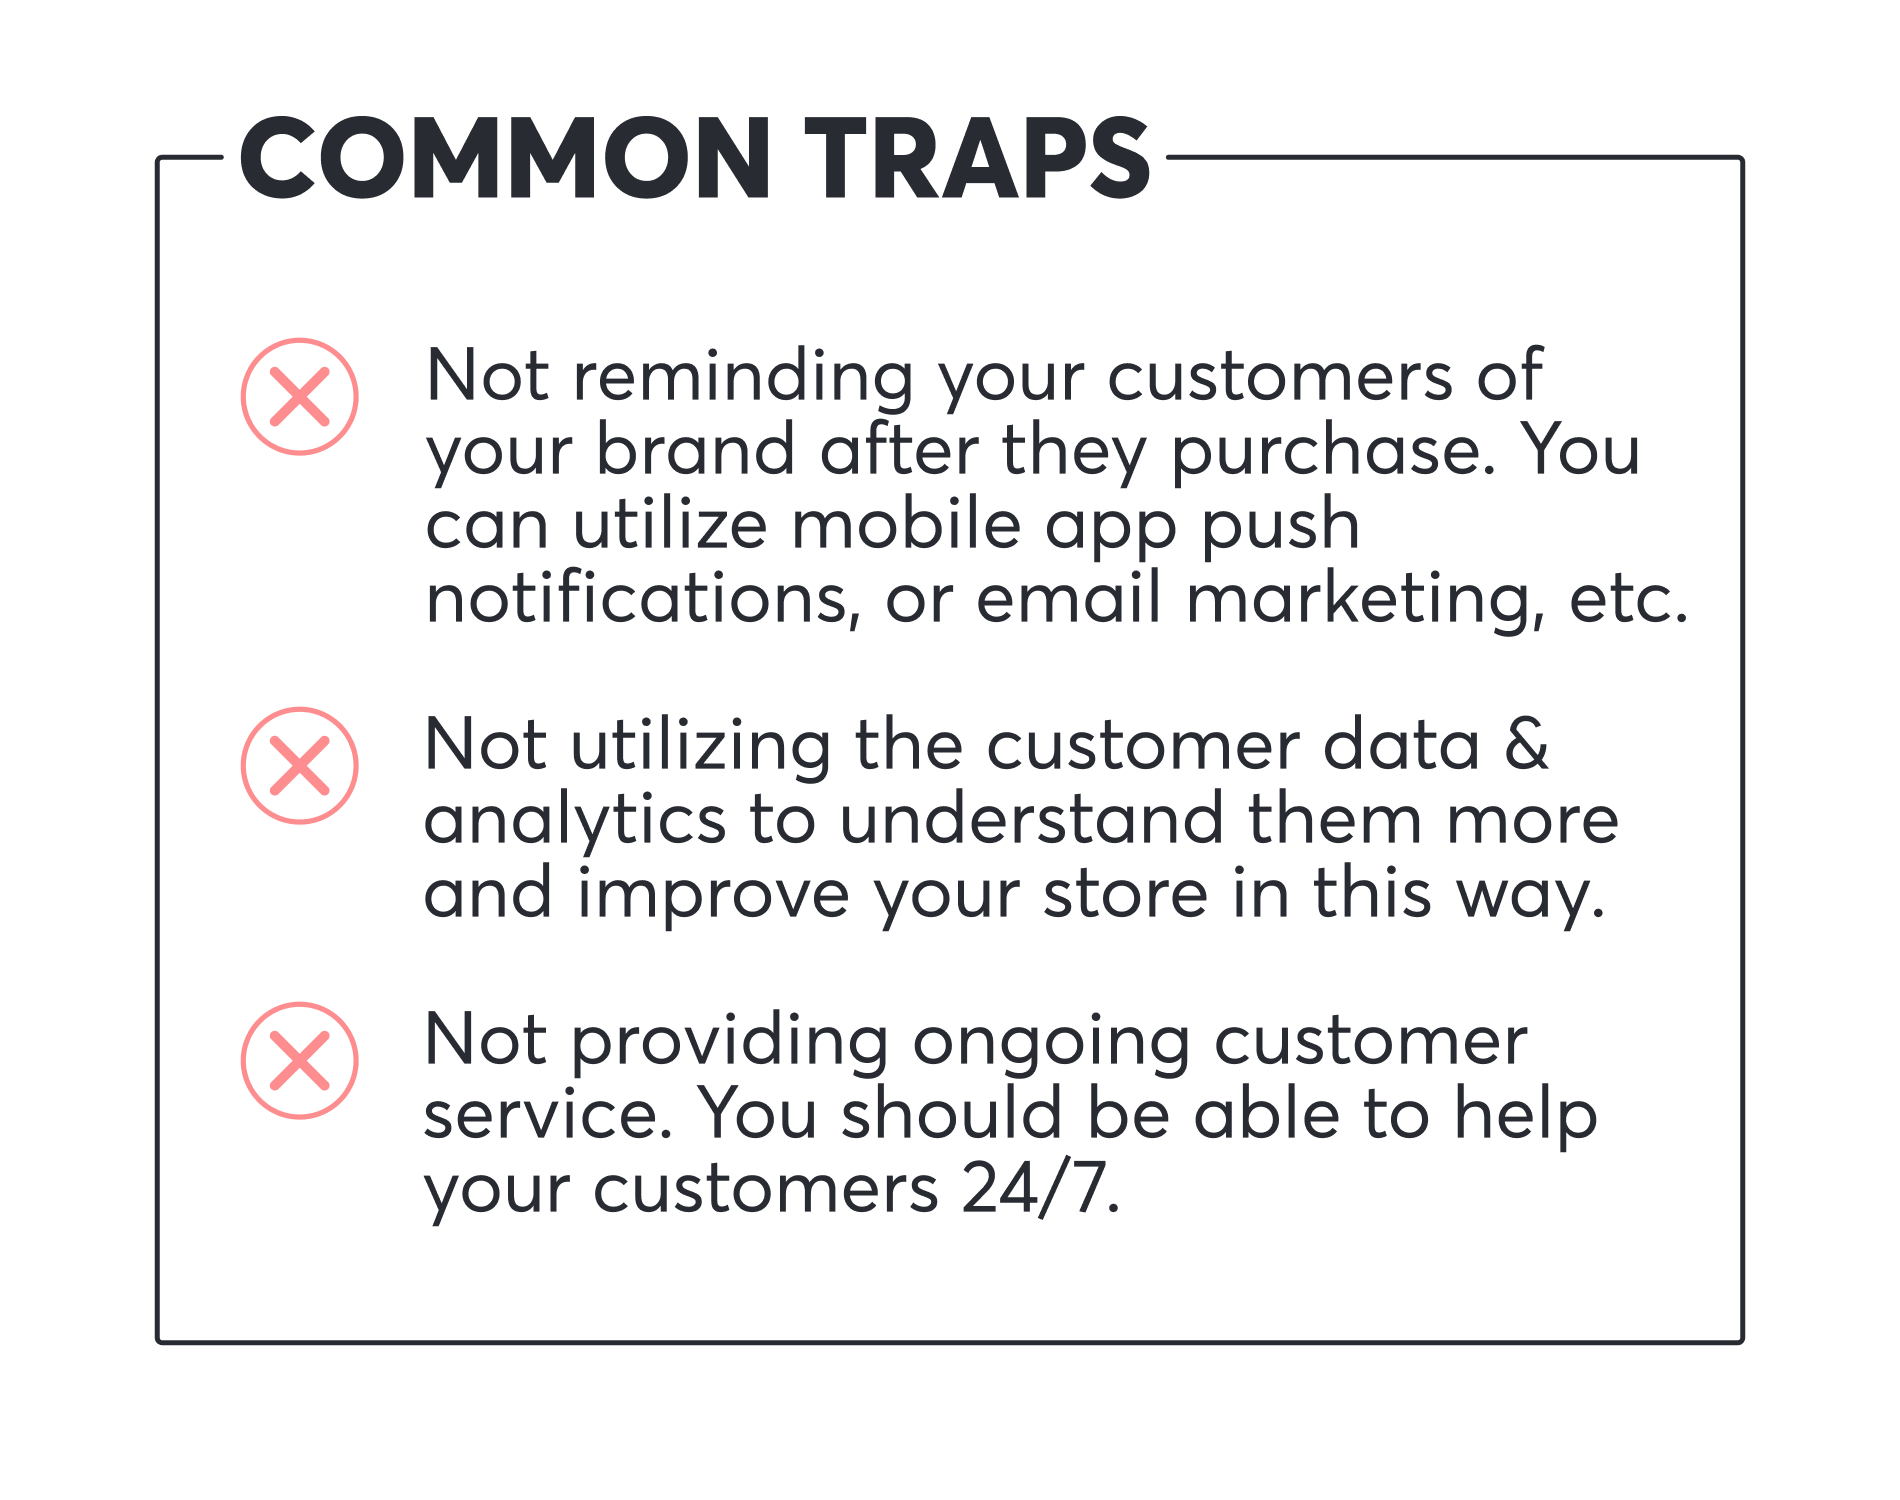 Common Traps to Optimize the Loyalty & Advocacy Stage of the Shopify Funnel